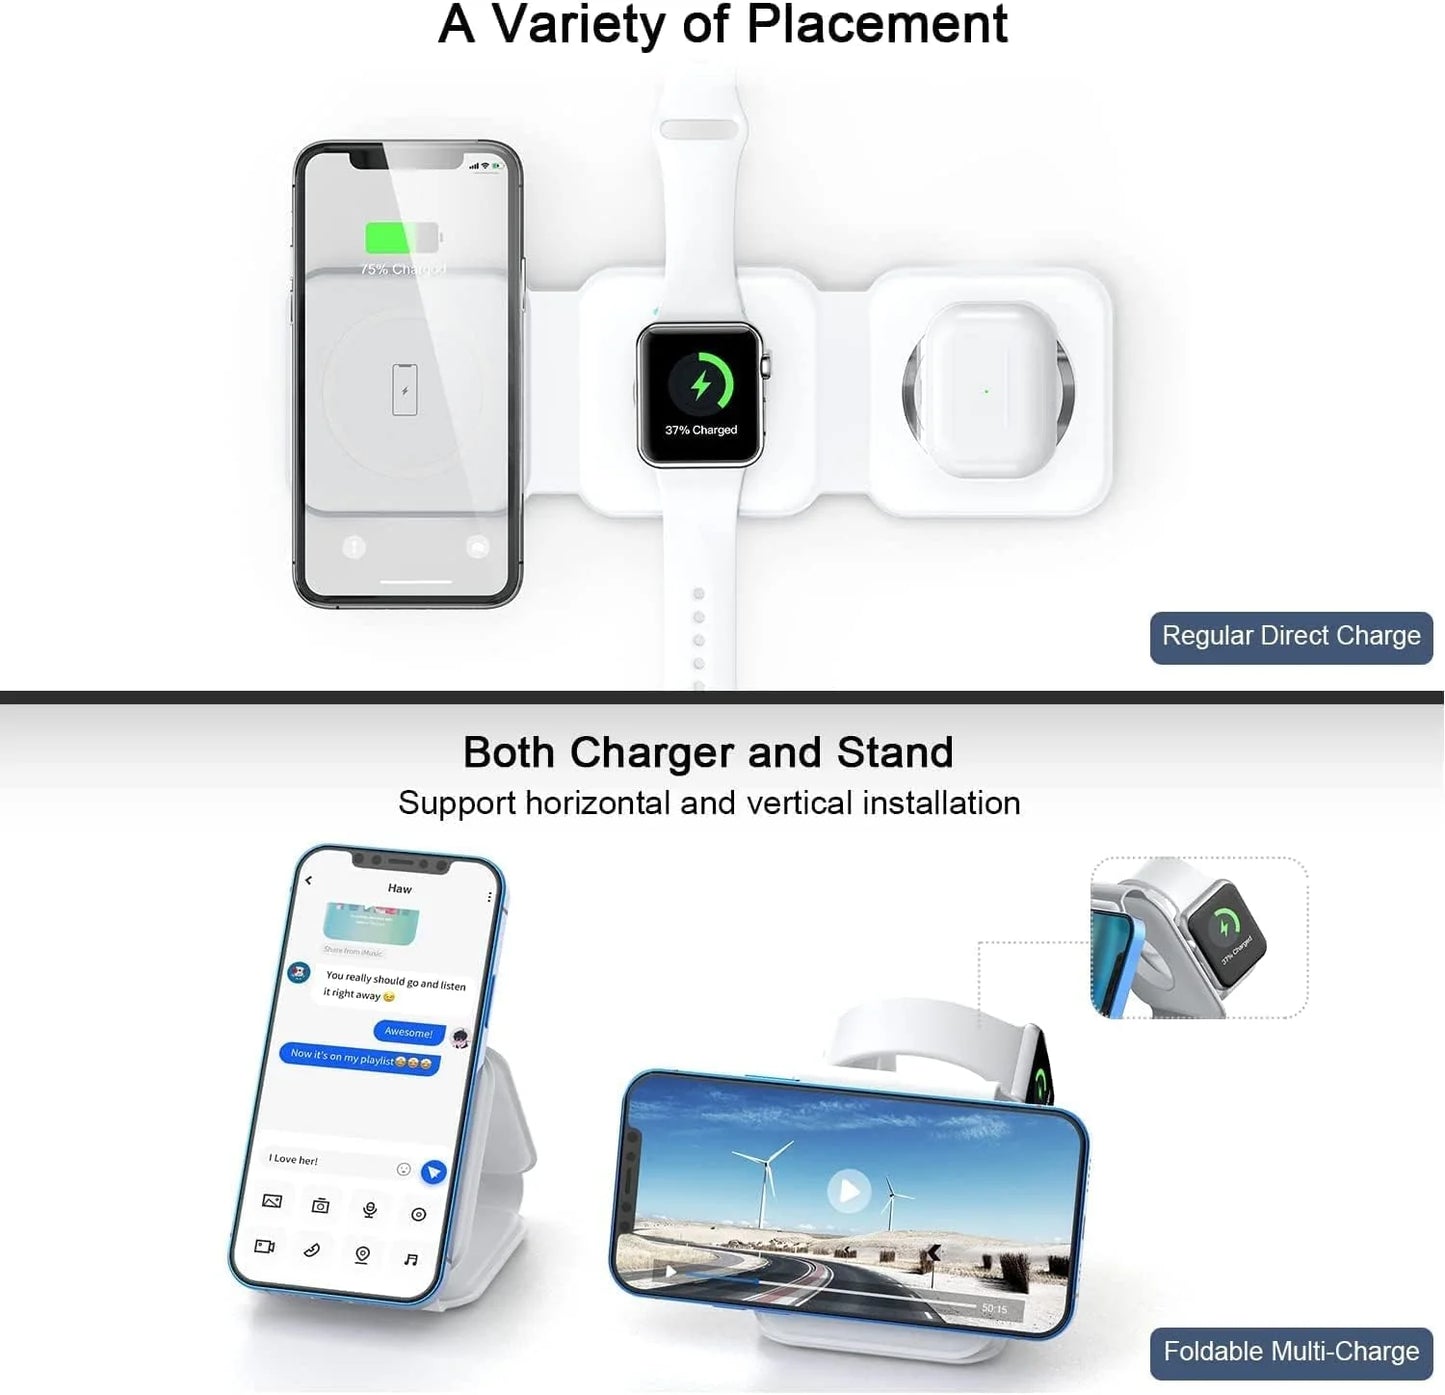 3 in 1 Wireless Charging Station, KIYOSAKI Upgrade Foldable Wireless Charger Magnetic Fast Wireless Charging Pad, Compatible with iPhone 14/13/12/11 Series, Apple Watch, AirPods Pro (White)